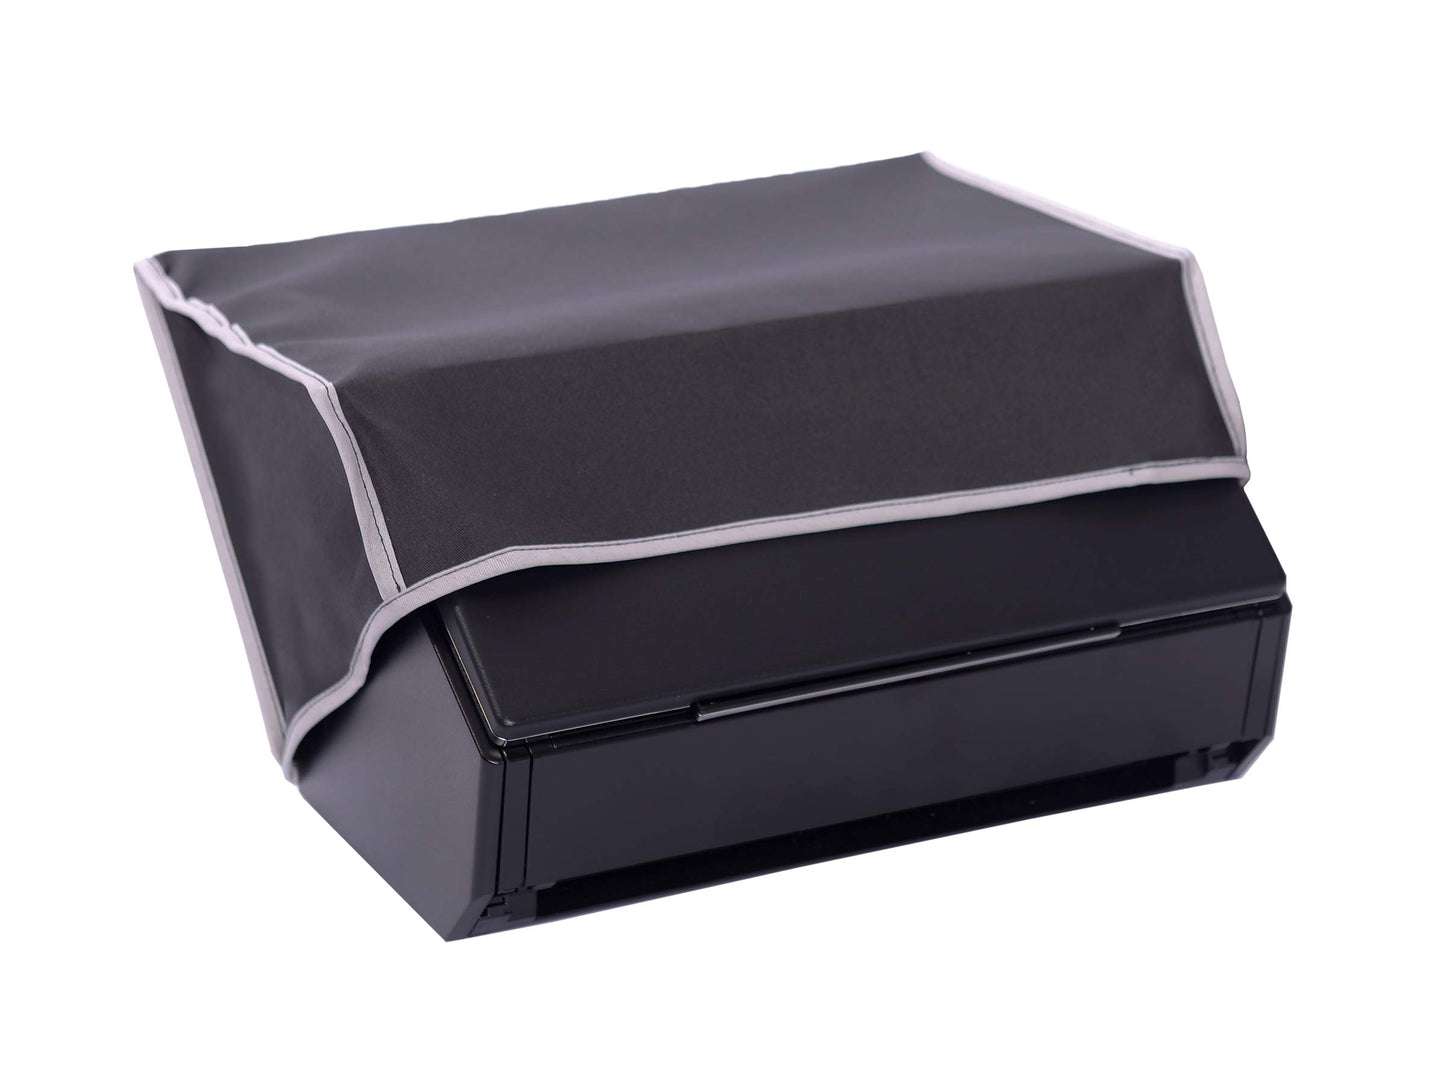 The Perfect Dust Cover, Black Nylon Cover for Brother ImageCenter ADS-3600W High-Speed Document Scanner, Anti Static Waterproof, Dimensions 12.1''W x 10.2''D x 9.8''H by The Perfect Dust Cover LLC